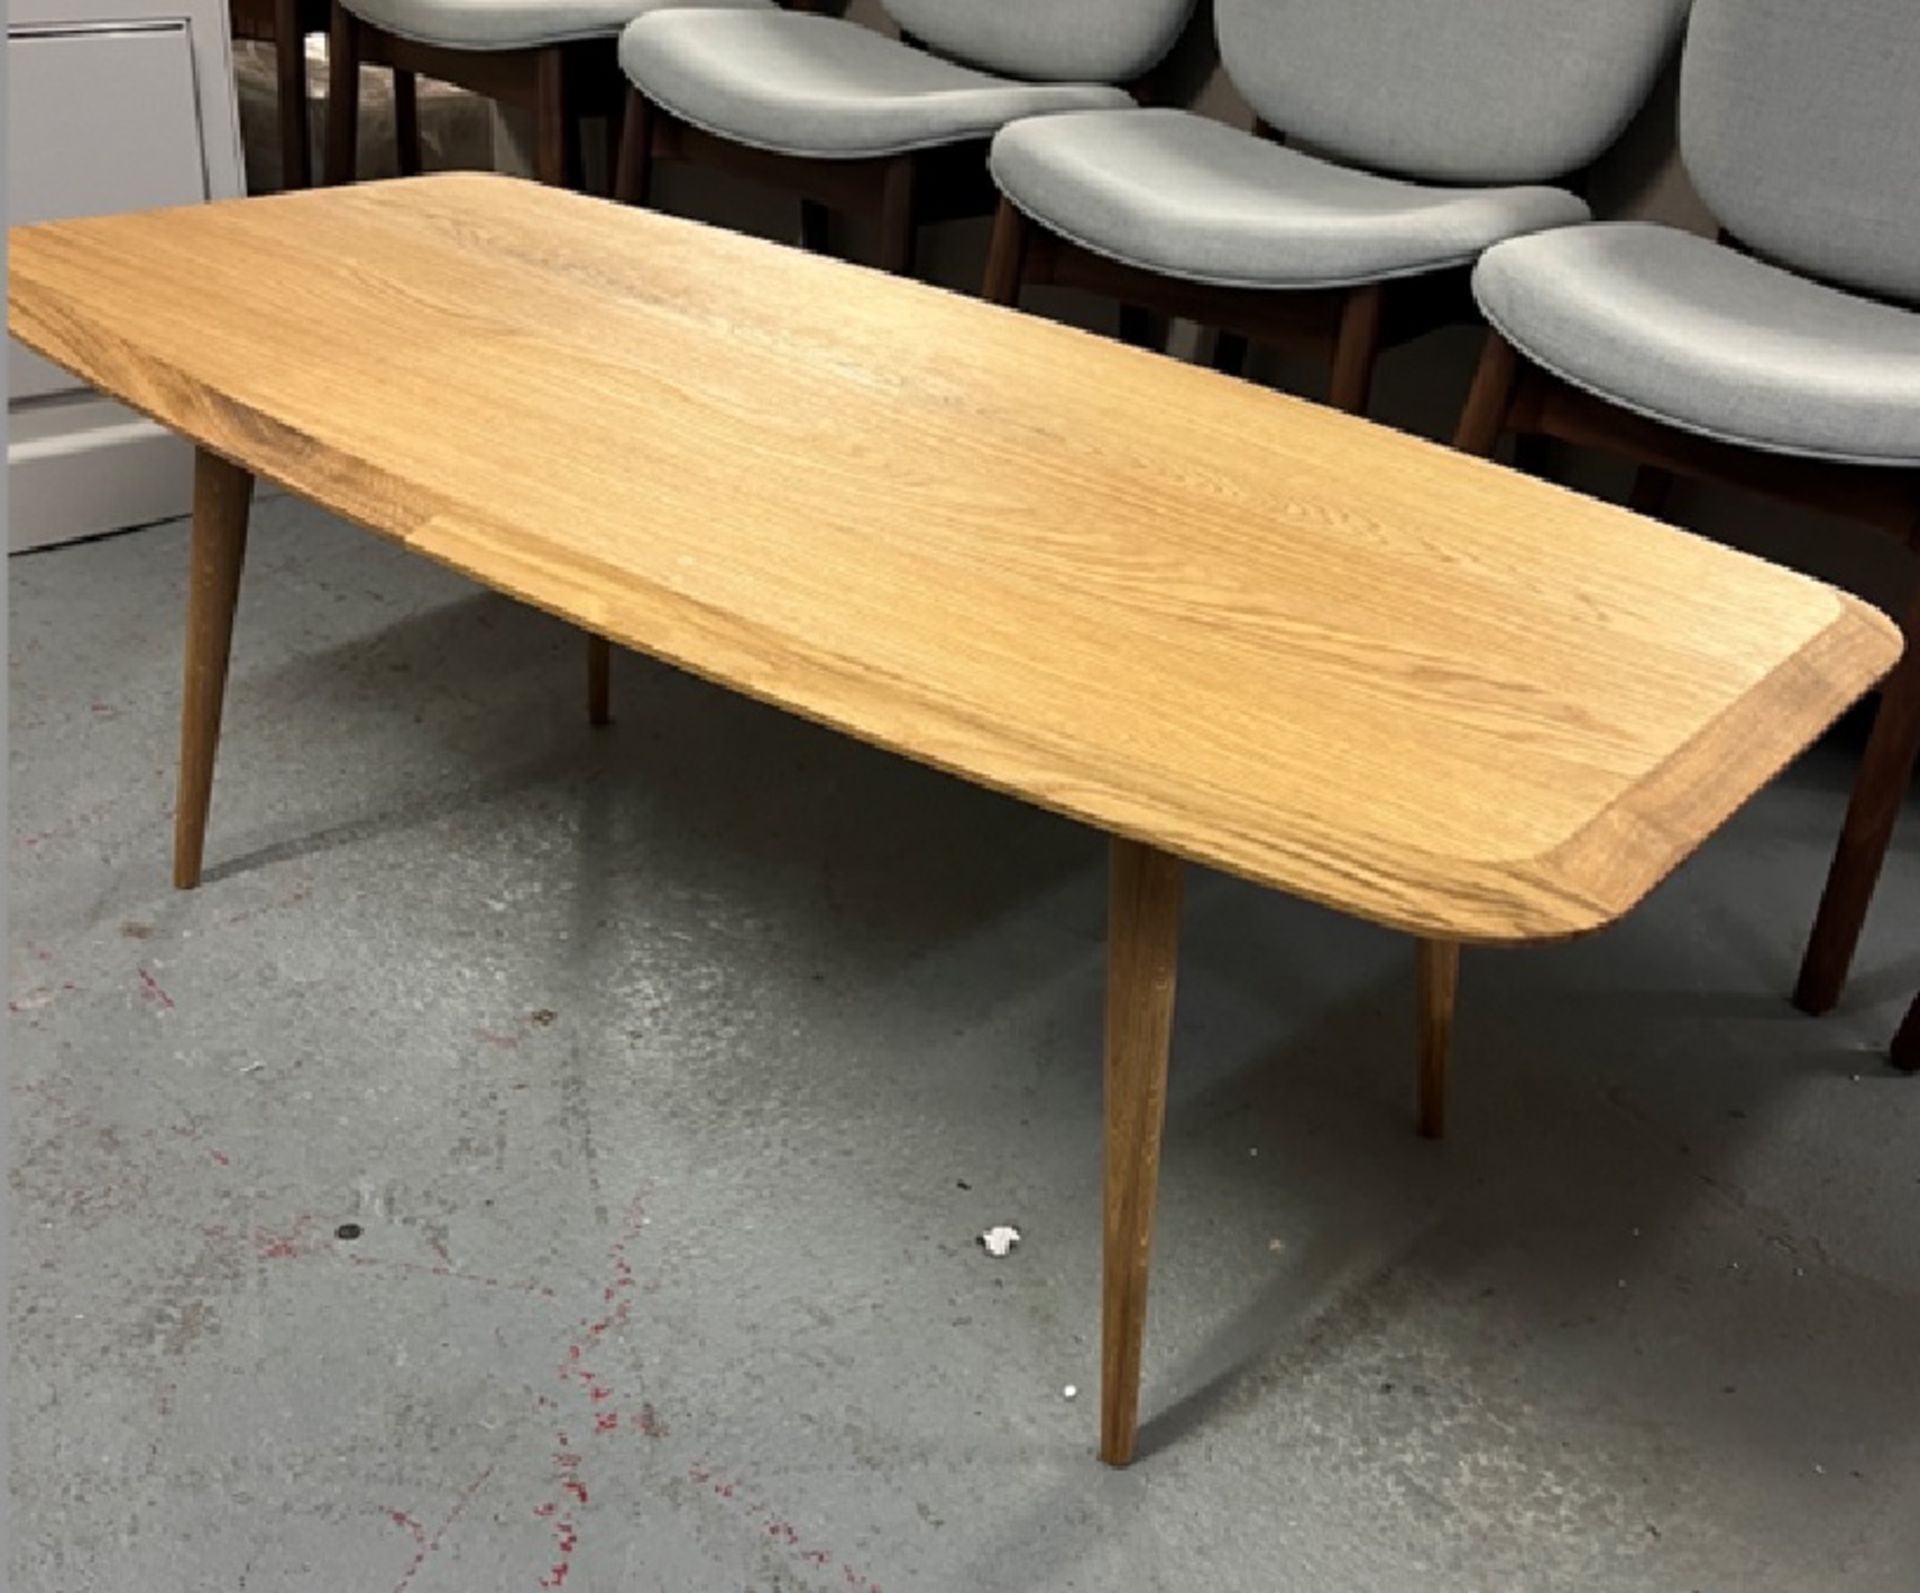 Egle Table the epitome of chic coffee tables. Crafted from oil-finished oak and finished with a